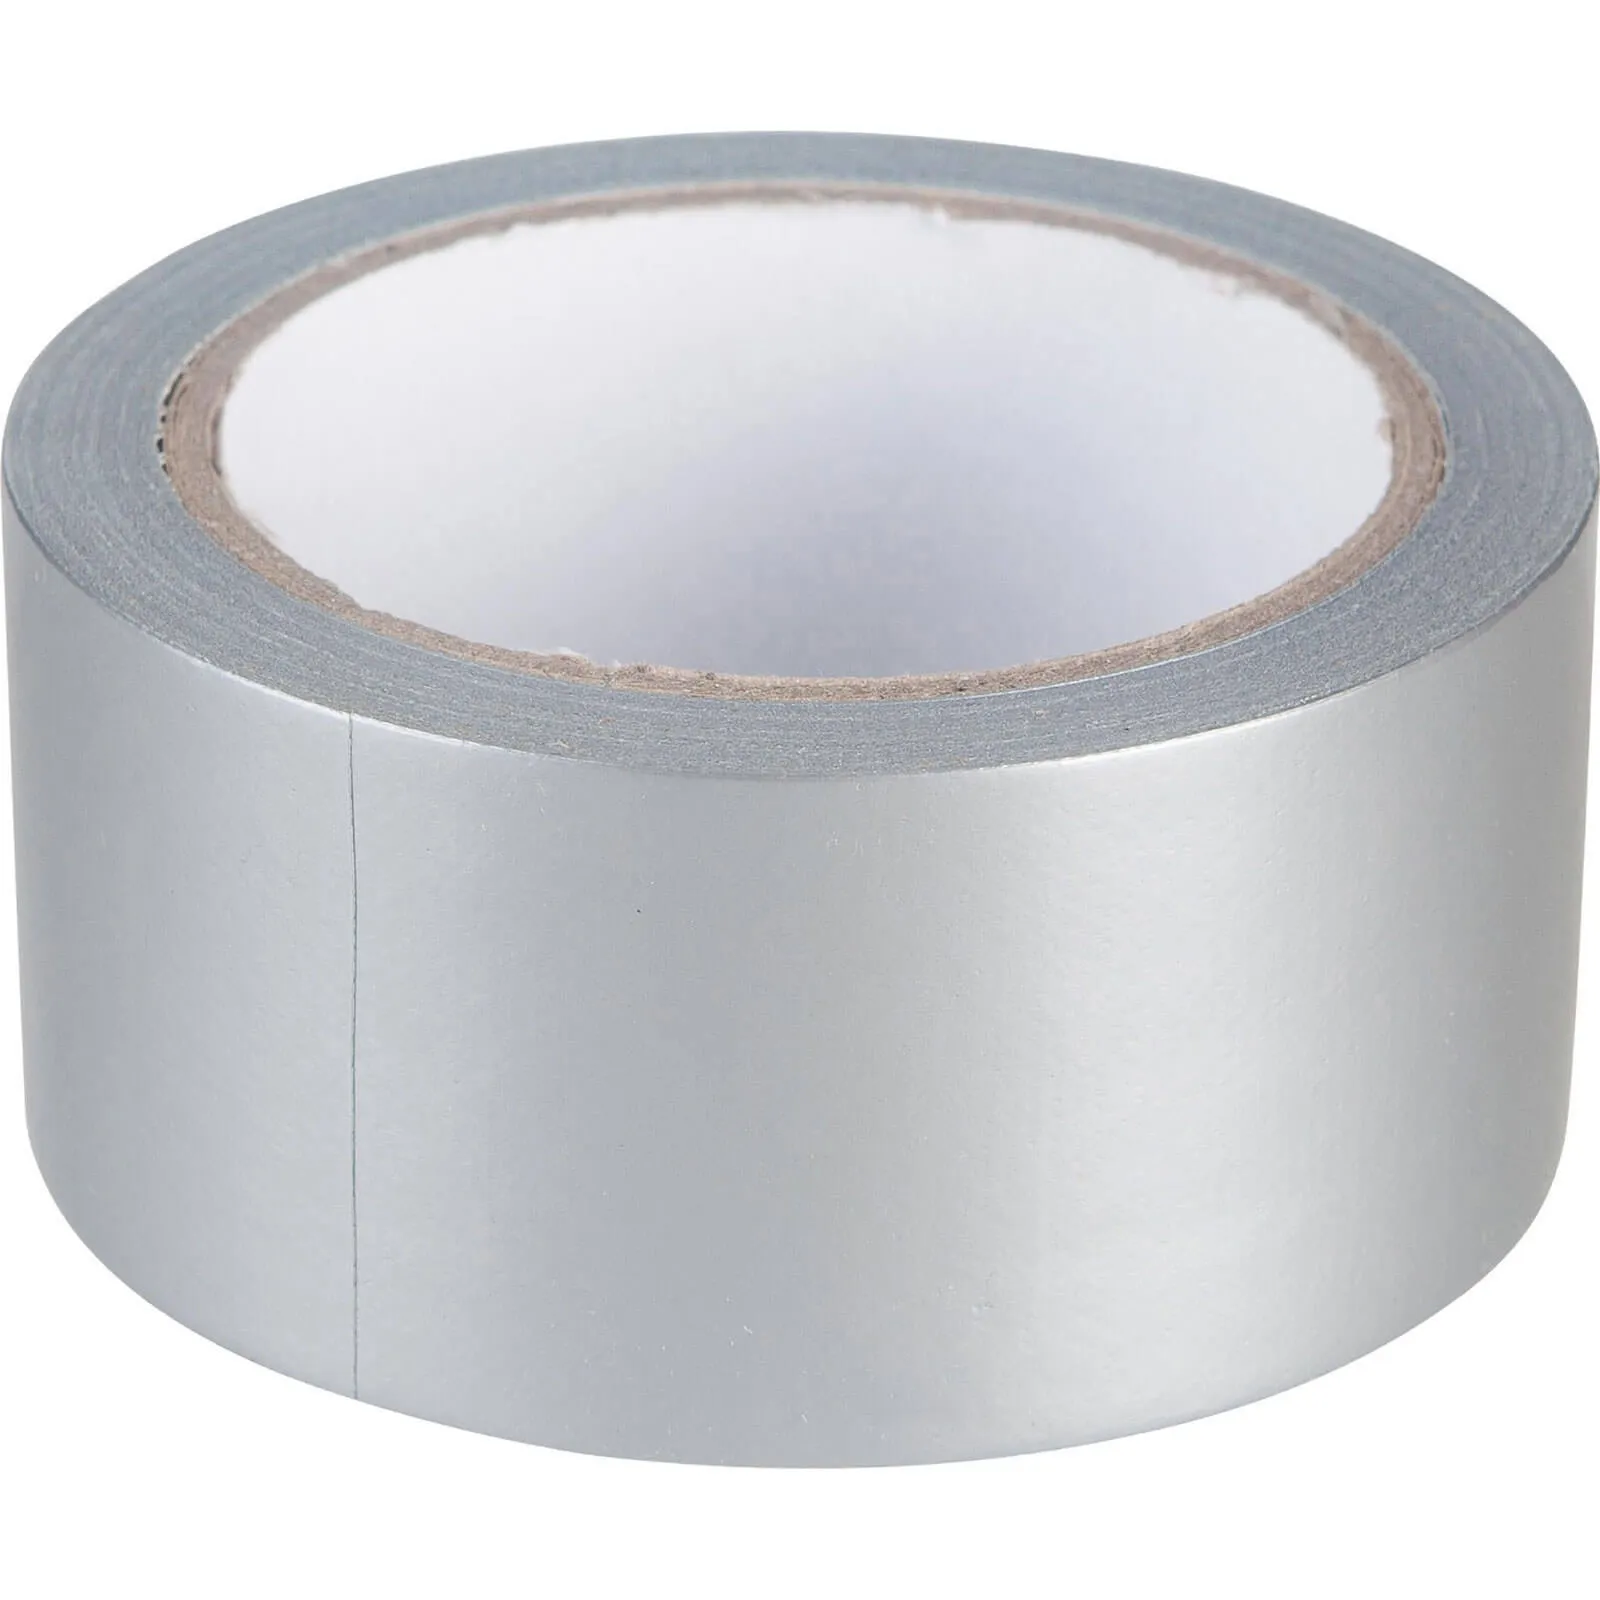 Sirius Cloth Duct Tape - Silver, 75mm, 50m